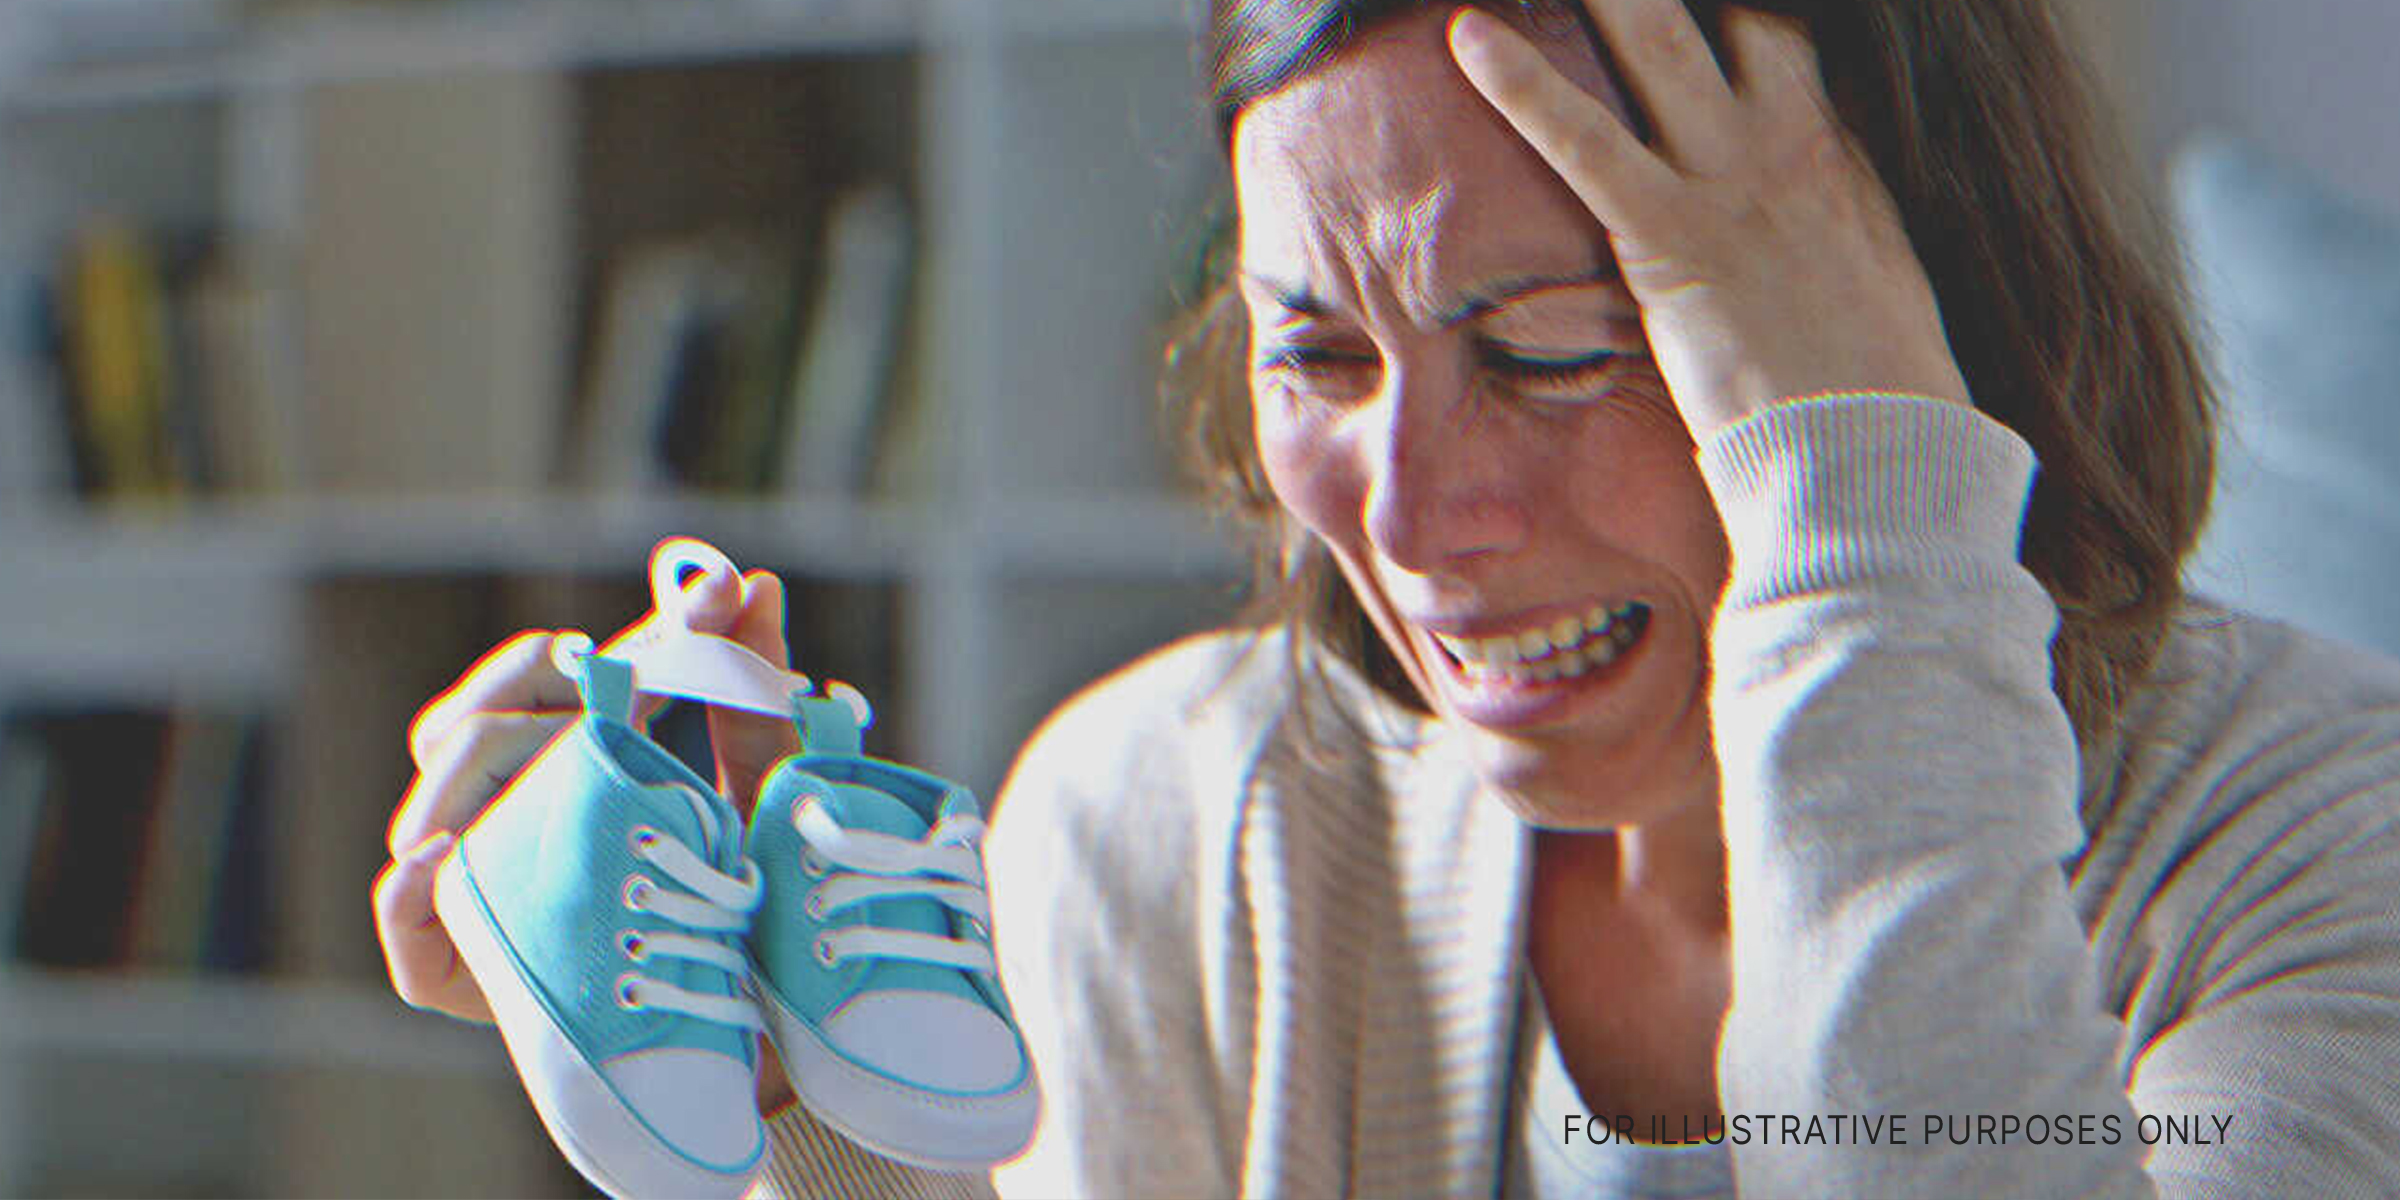 A woman holding baby shoes | Source: Shutterstock